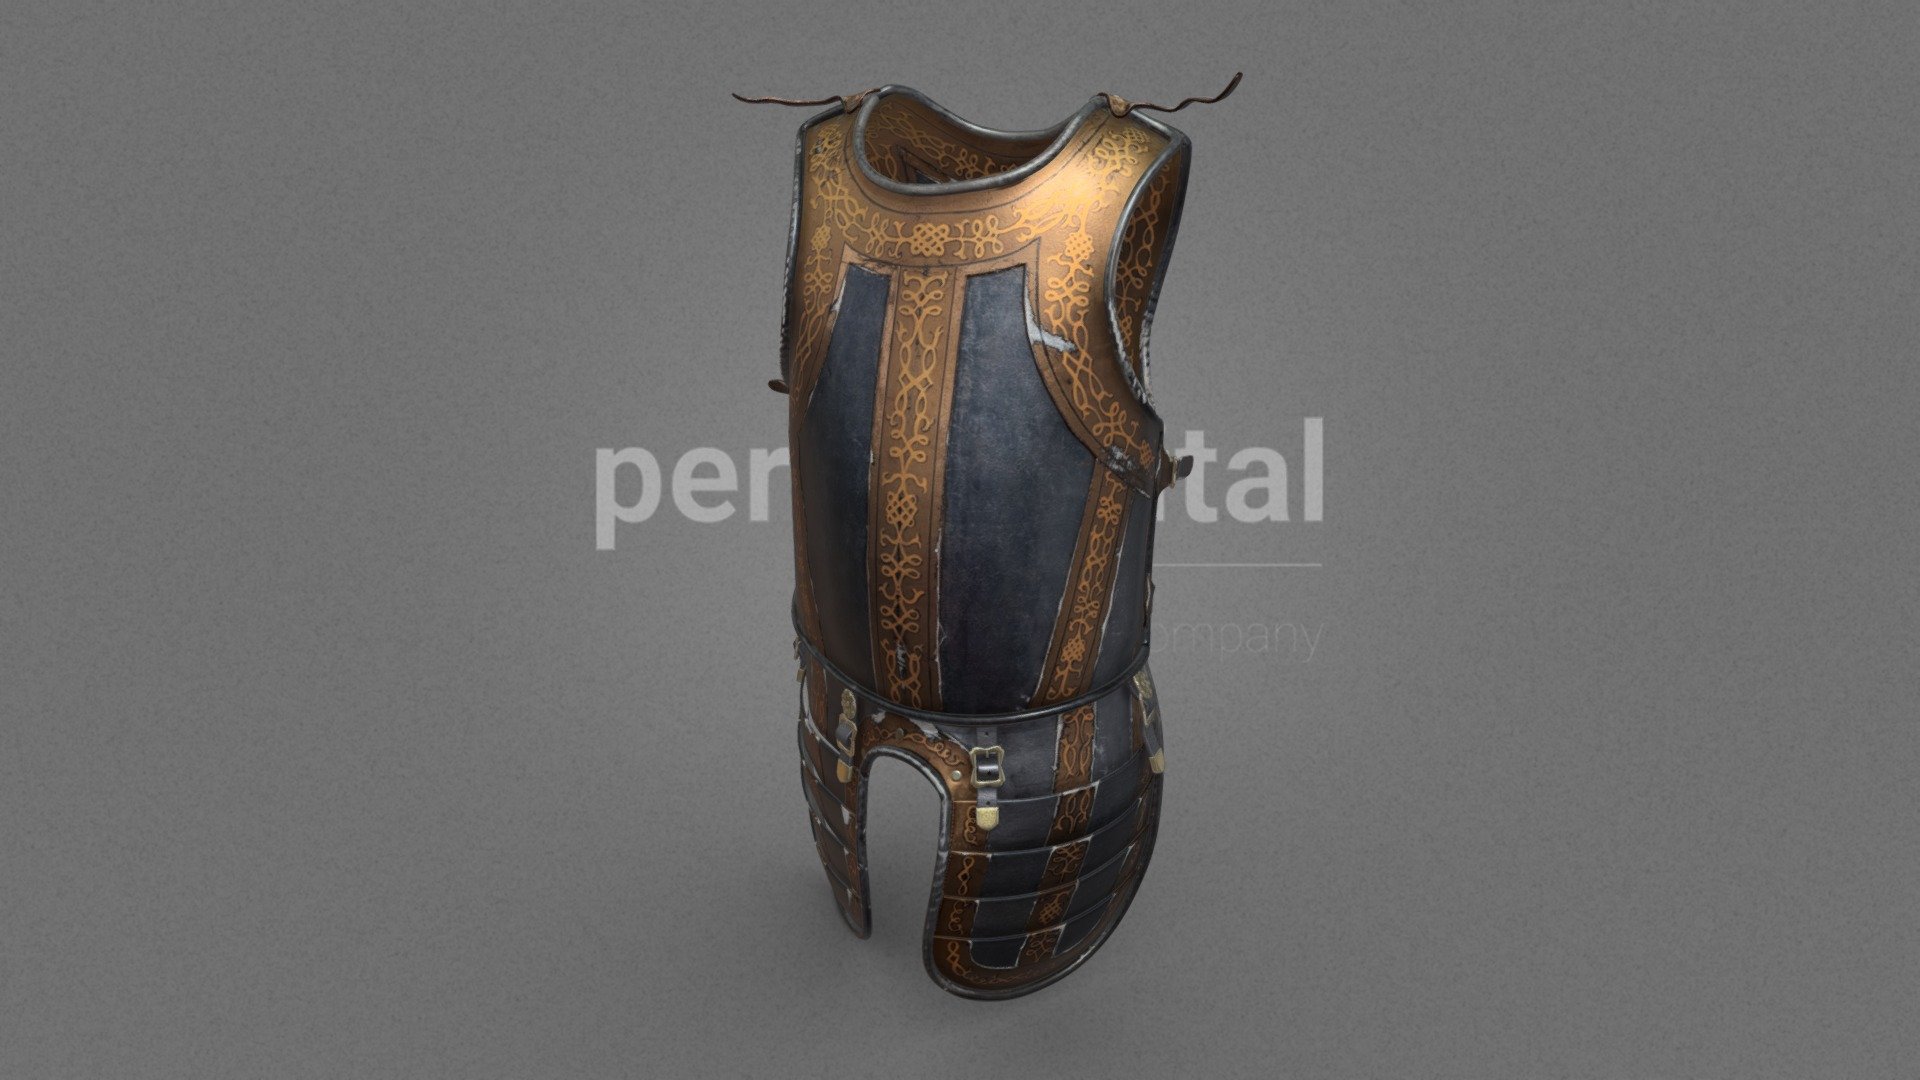 XIV, XV, XVI and XVII century medieval and renaissance steel cuirass.

We are Peris Digital, and we make RAW meshes (Photogrammetry) and Digital Doubles.

This is a RAW mesh, taken by our photogrammetry team in our RIG with 144 Sony Alpha cameras.
Check our web, make your selection and contact us to get your costume scanned or talk with us to take a Demo RAW mesh to download it.

Contact: info@peris.costumes - Medieval Steel cuirass 11 - 3D model by Peris Digital (@perisdigital) 3d model